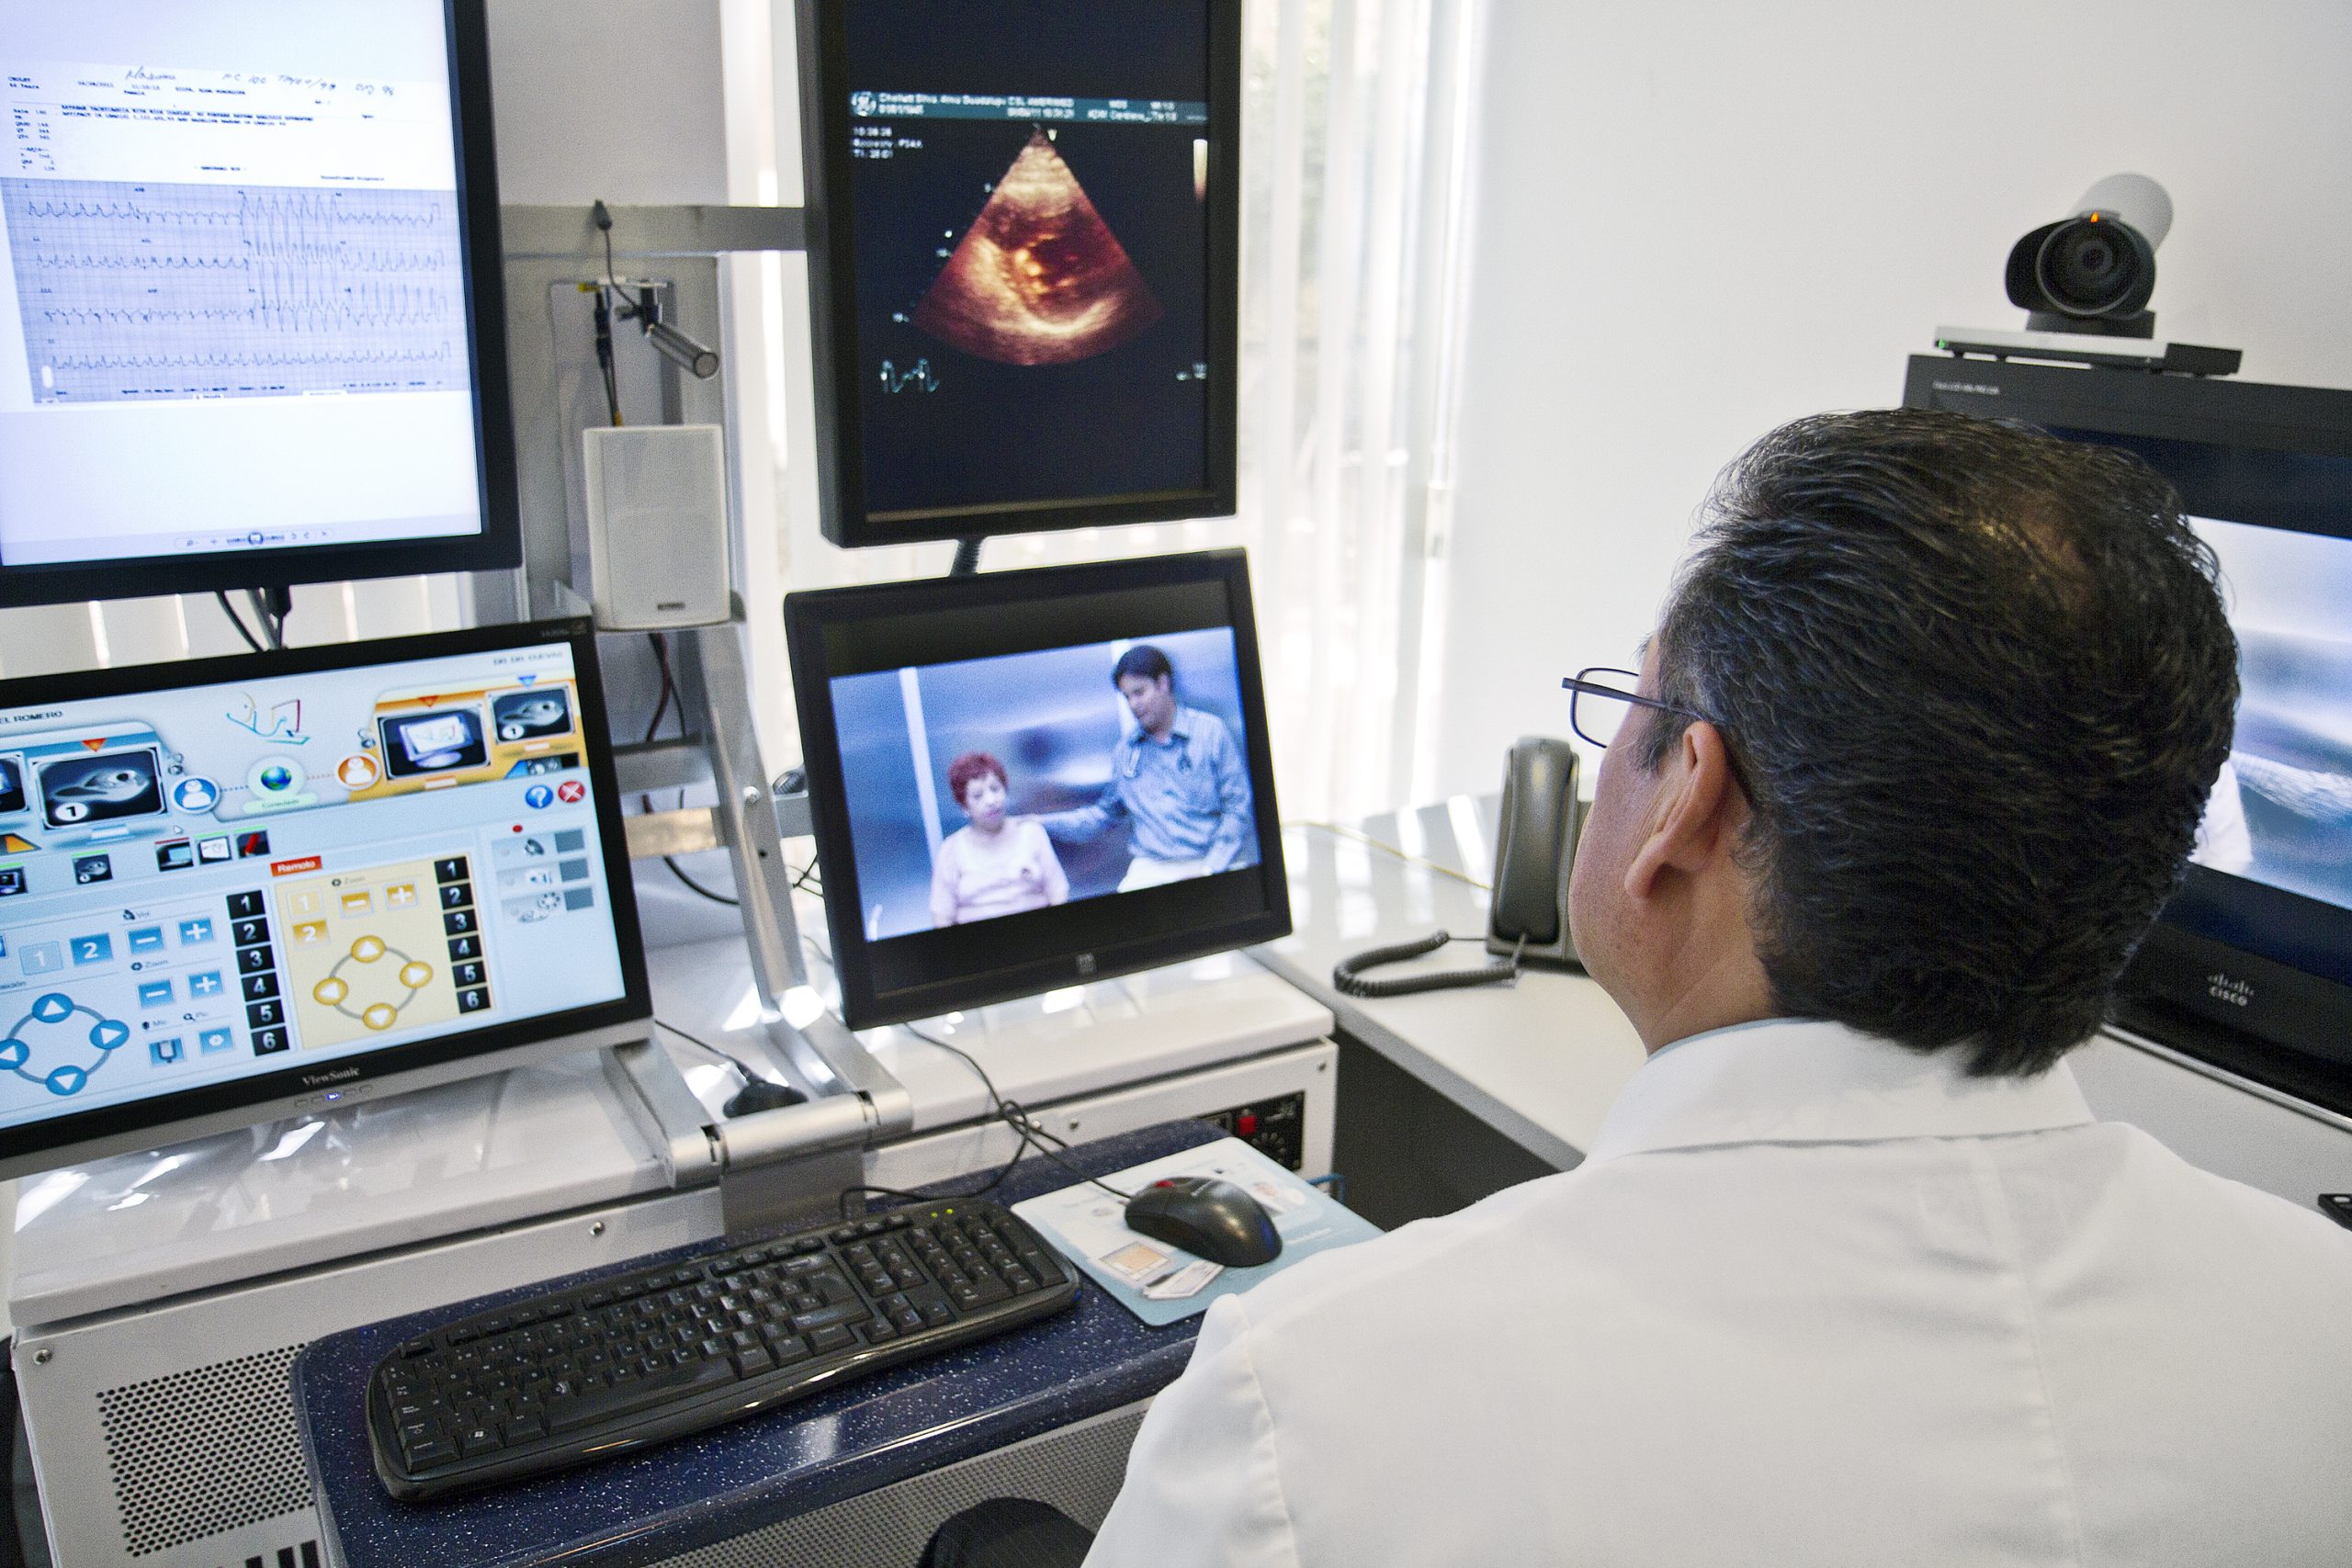 Telemedicine lets doctors and patients communicate from everywhere remotely